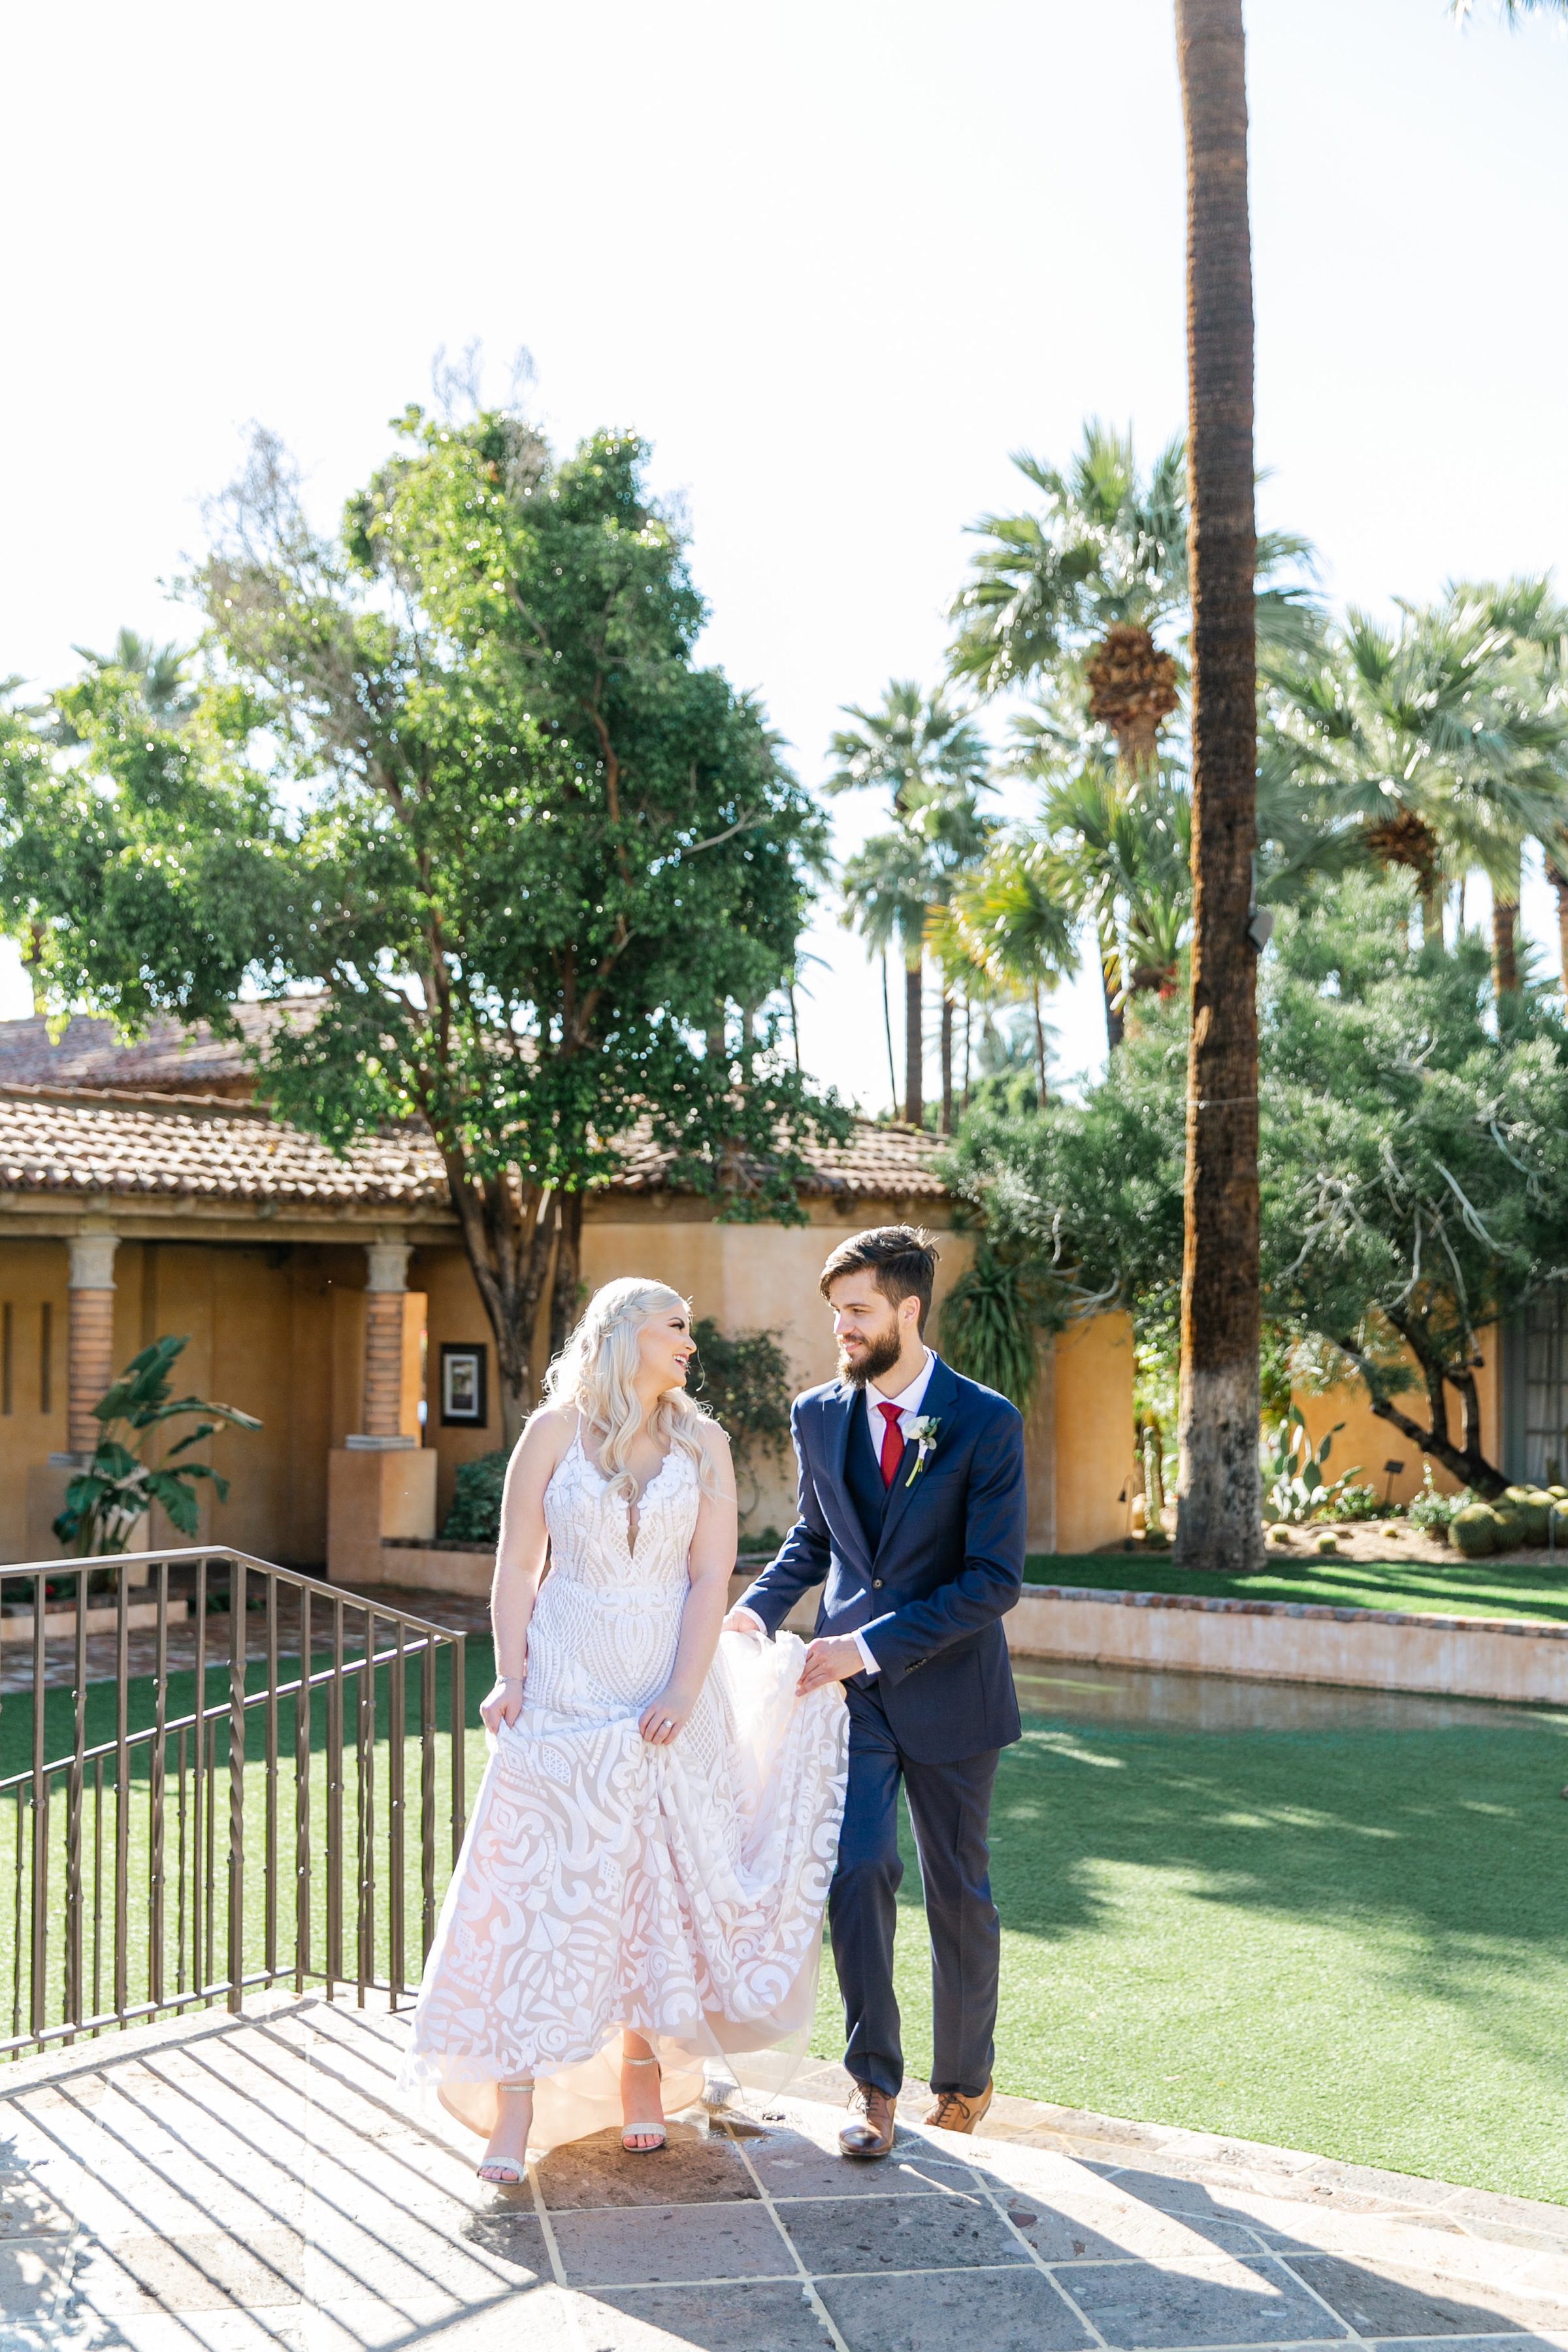 Karlie Colleen Photography - The Royal Palms Wedding - Some Like It Classic - Alex & Sam-179